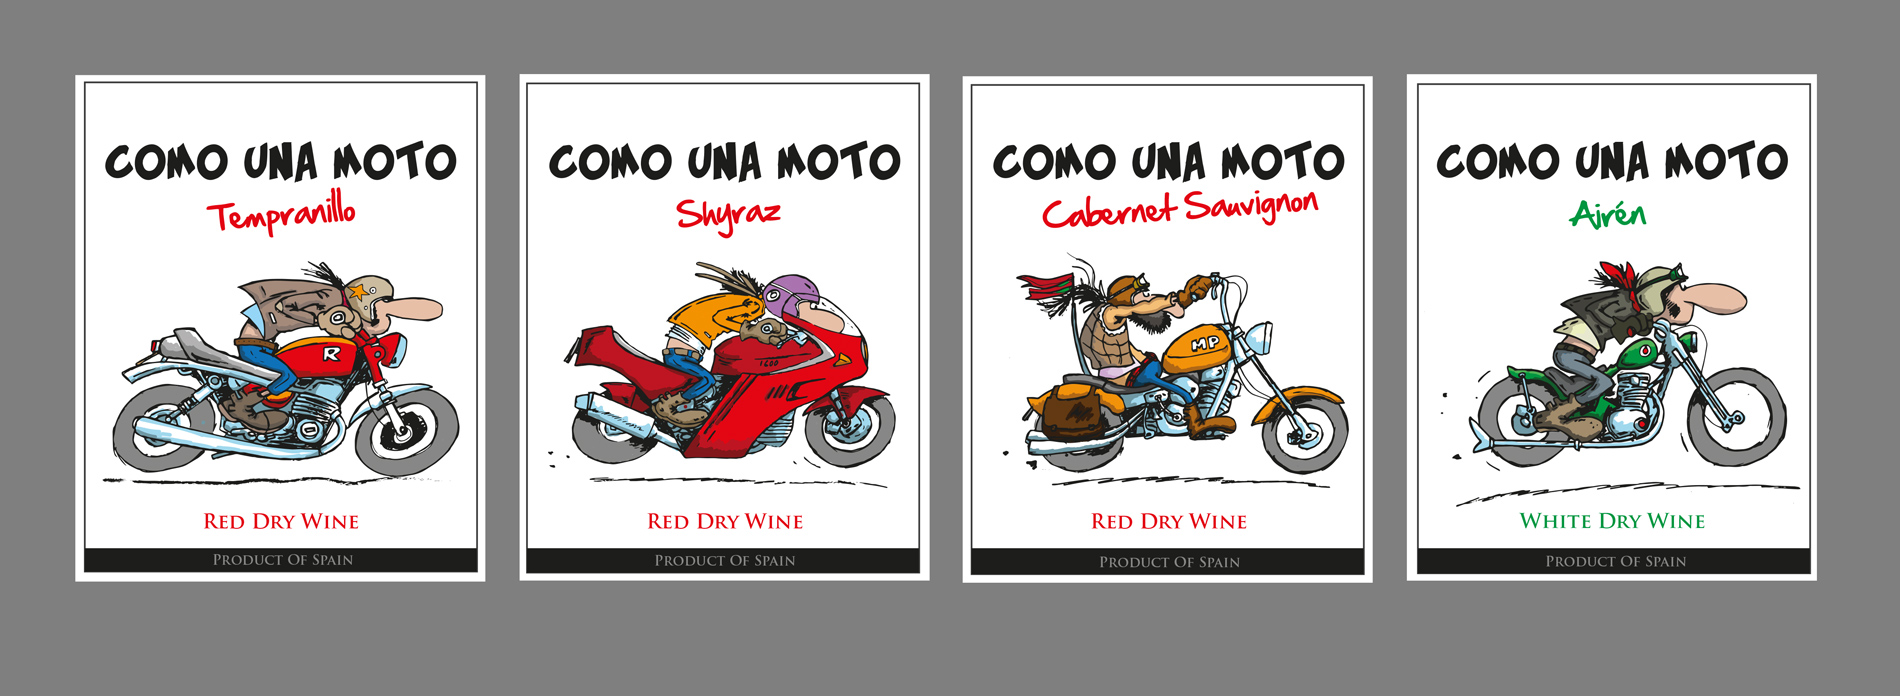 Portfolio of graphic and creative design works on wine labels and packaging for Spanish wine: COMO UNA MOTO